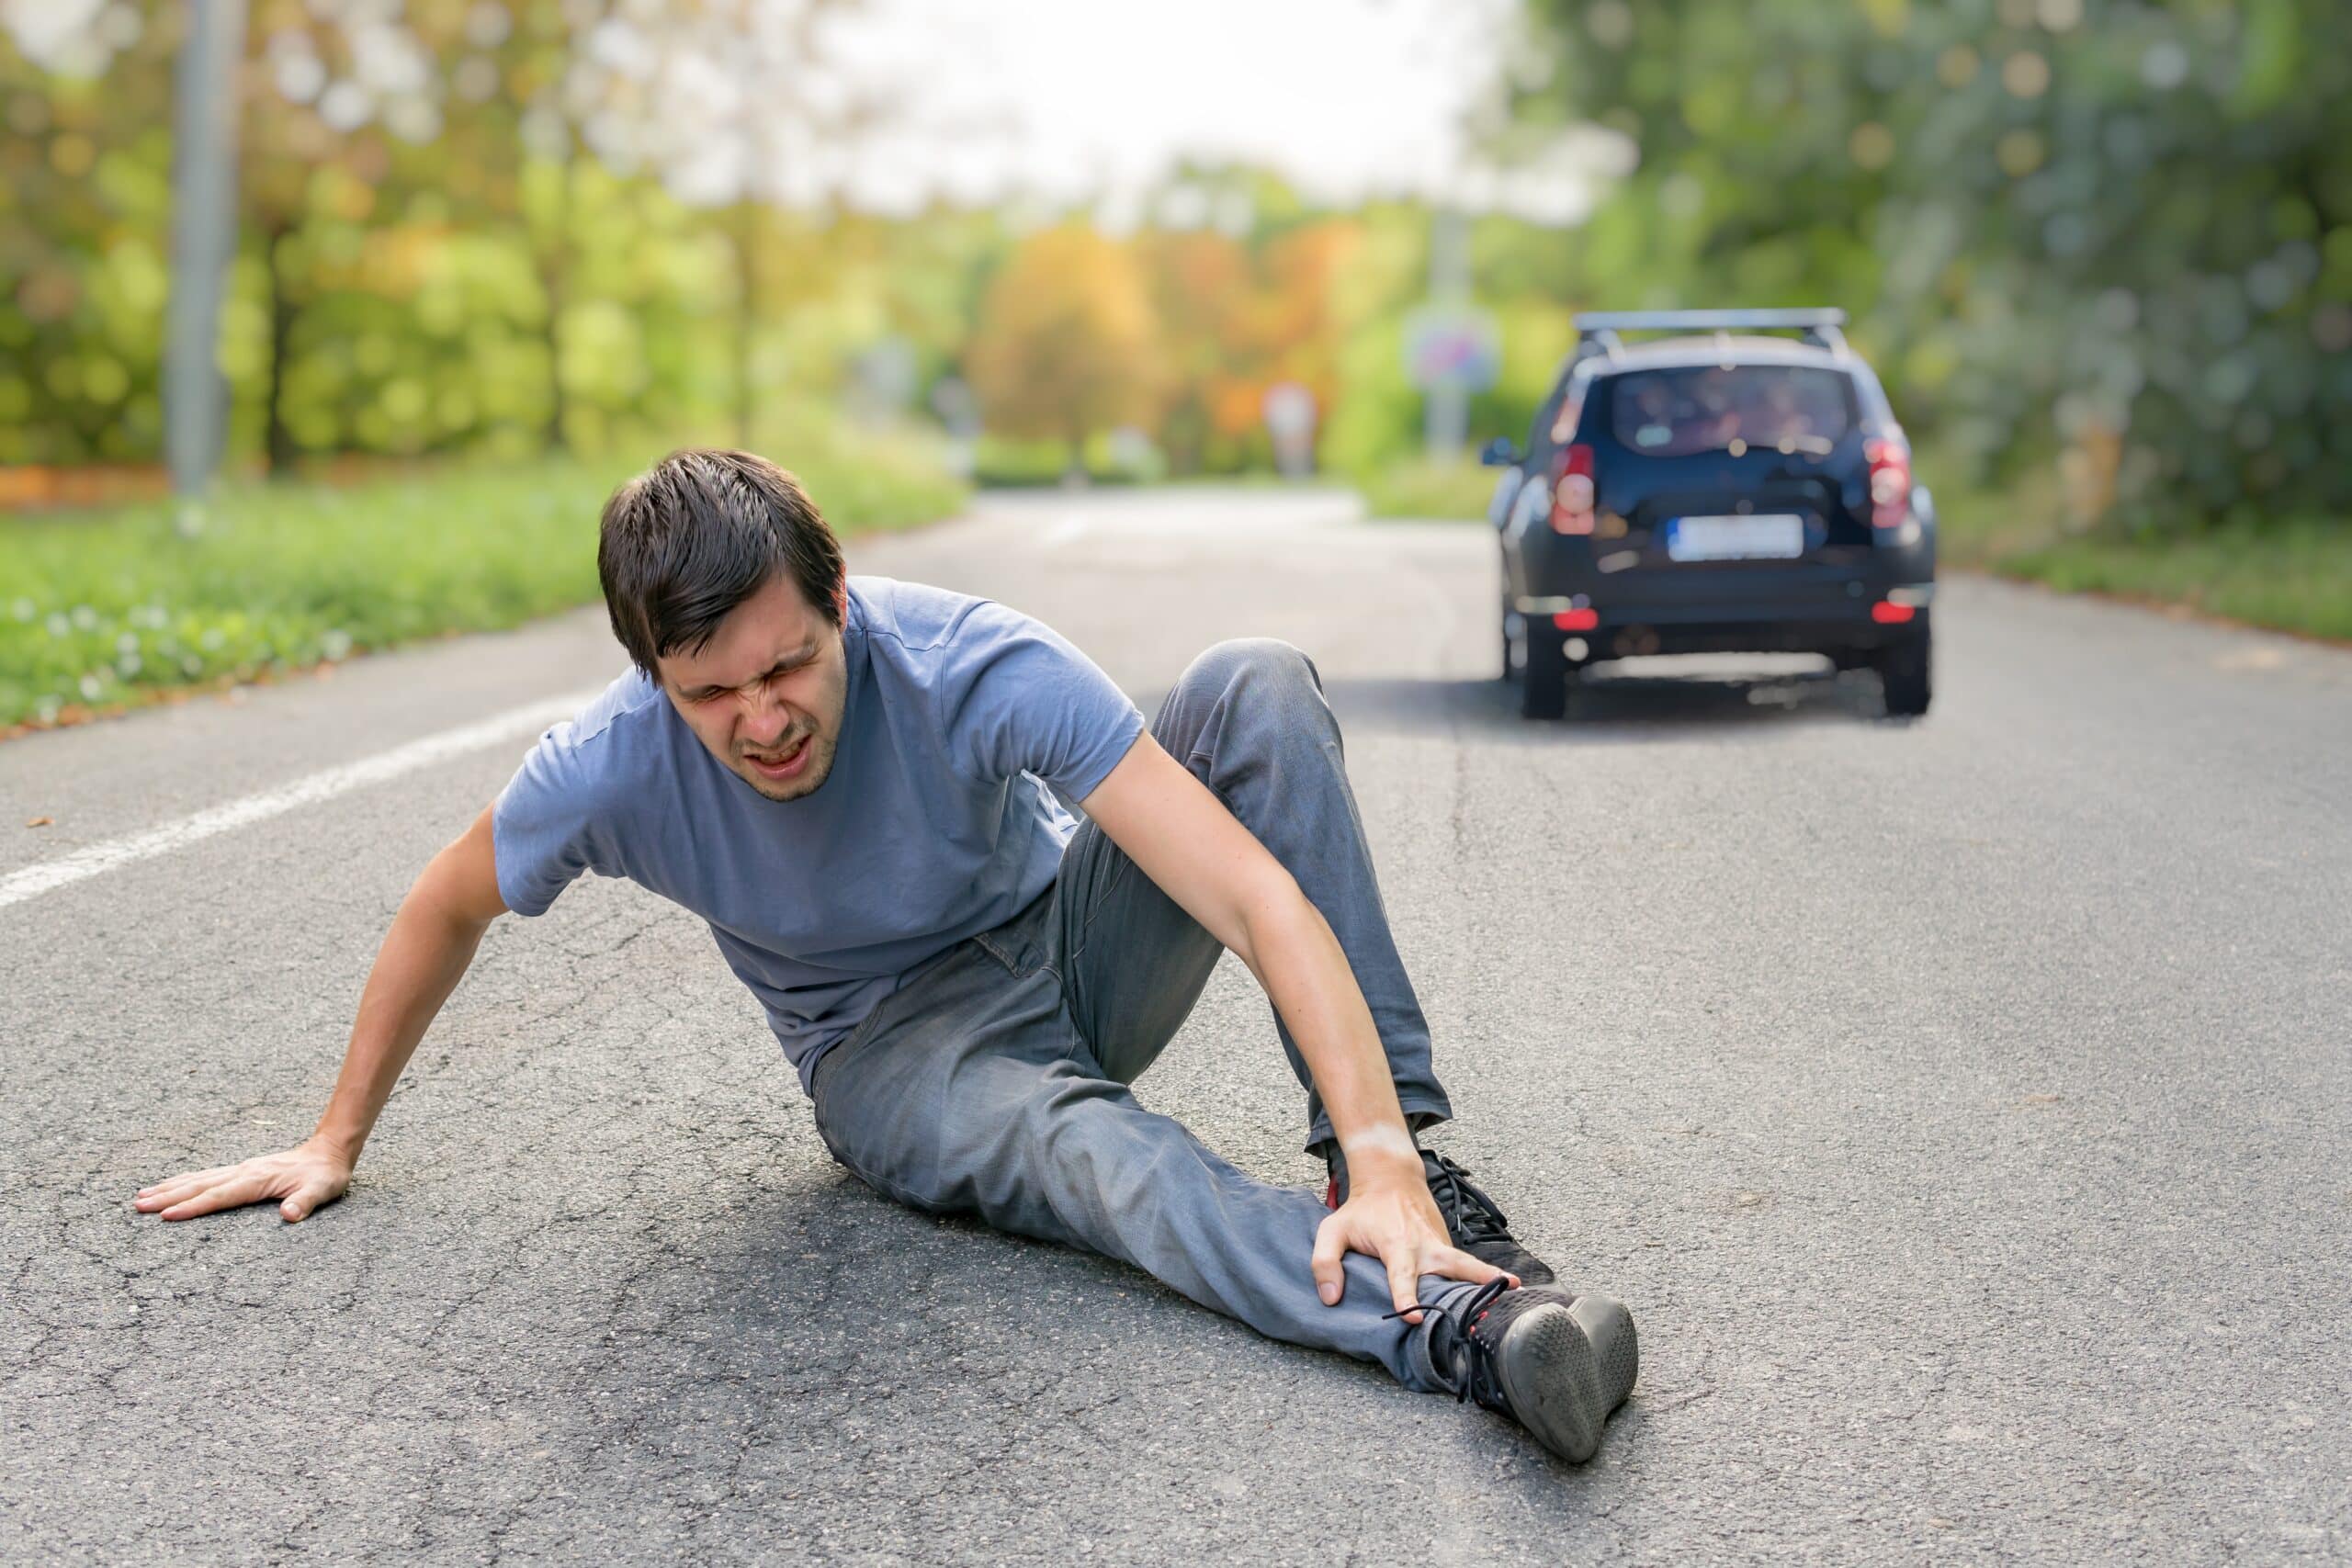 How Does Maryland Law Address Hit and Run Traffic Accidents?